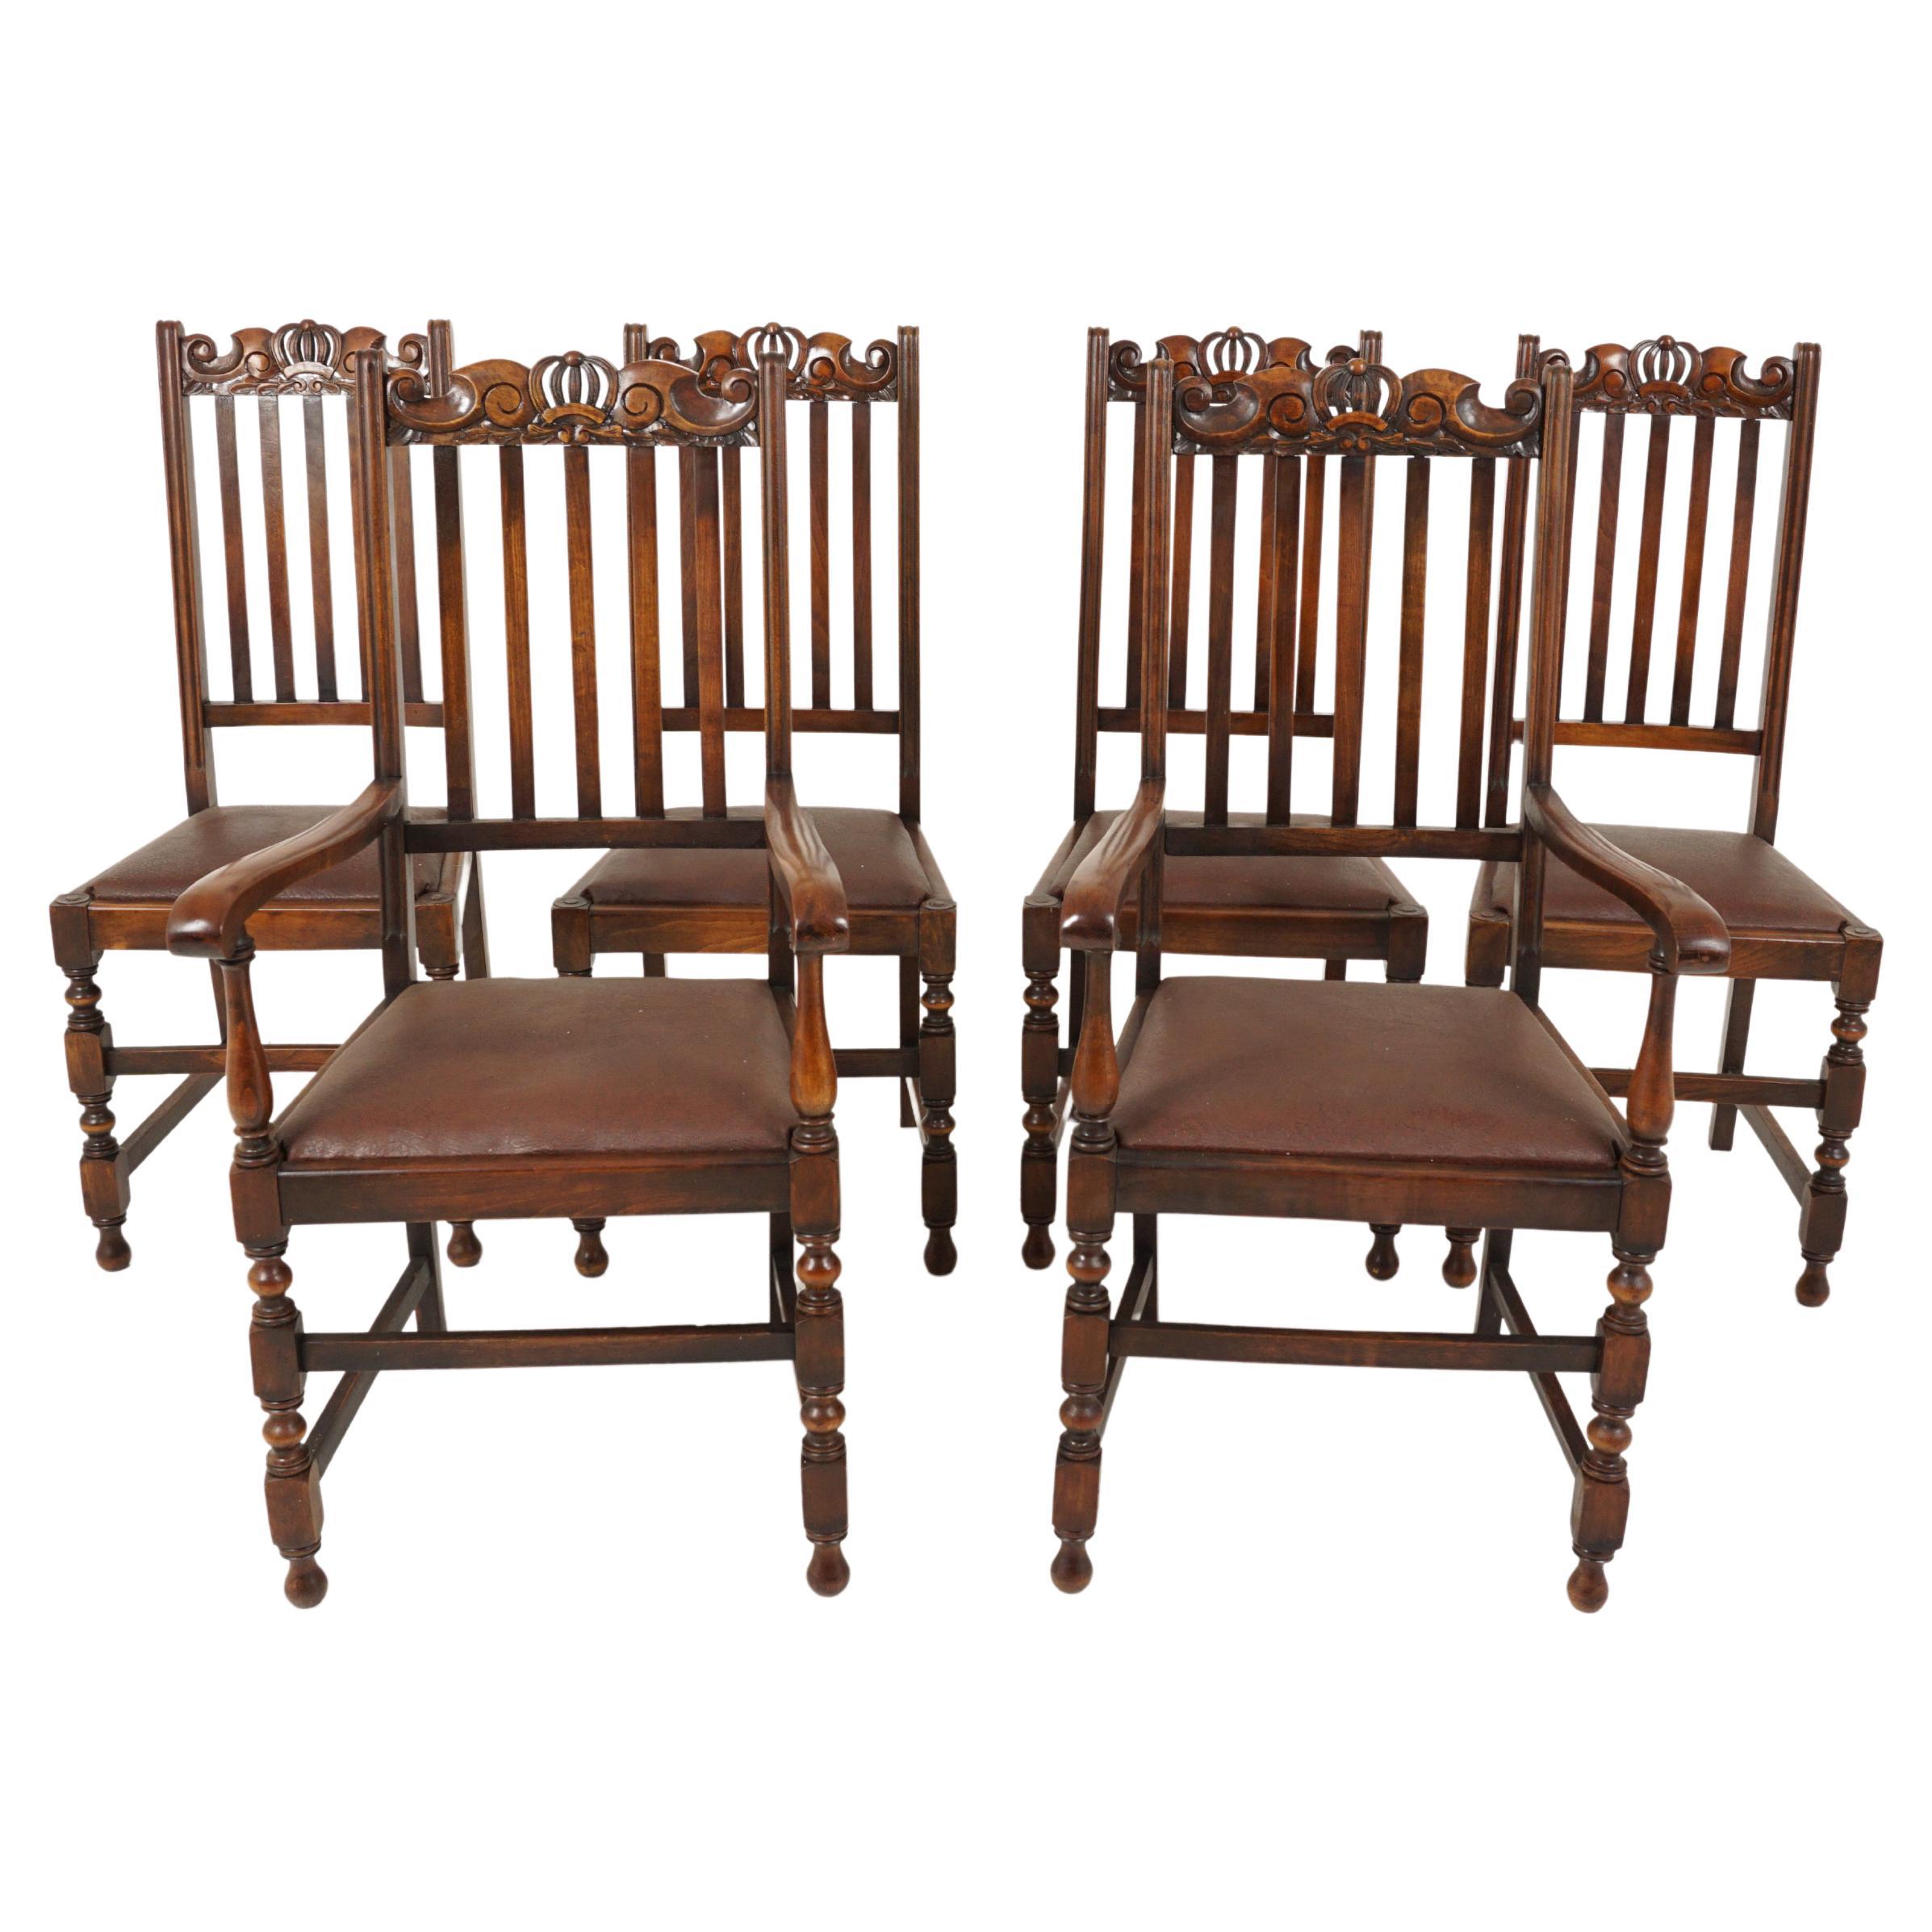 Antique Dining Chair, Set of 6, Carved Oak, Turned Legs, Scotland 1920, B2674